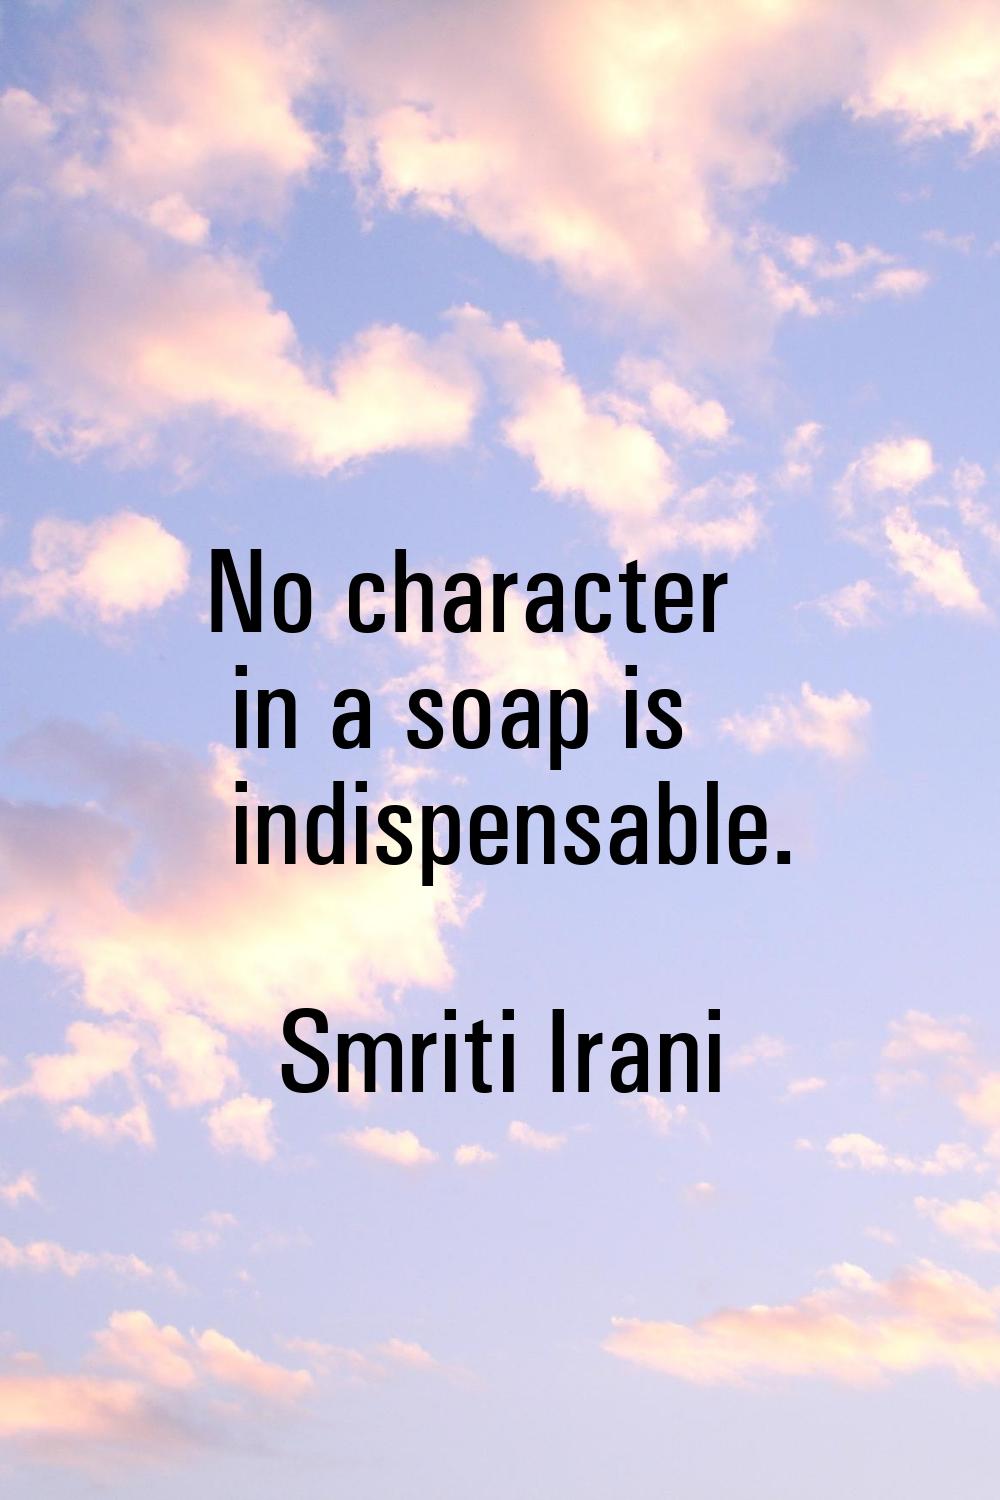 No character in a soap is indispensable.